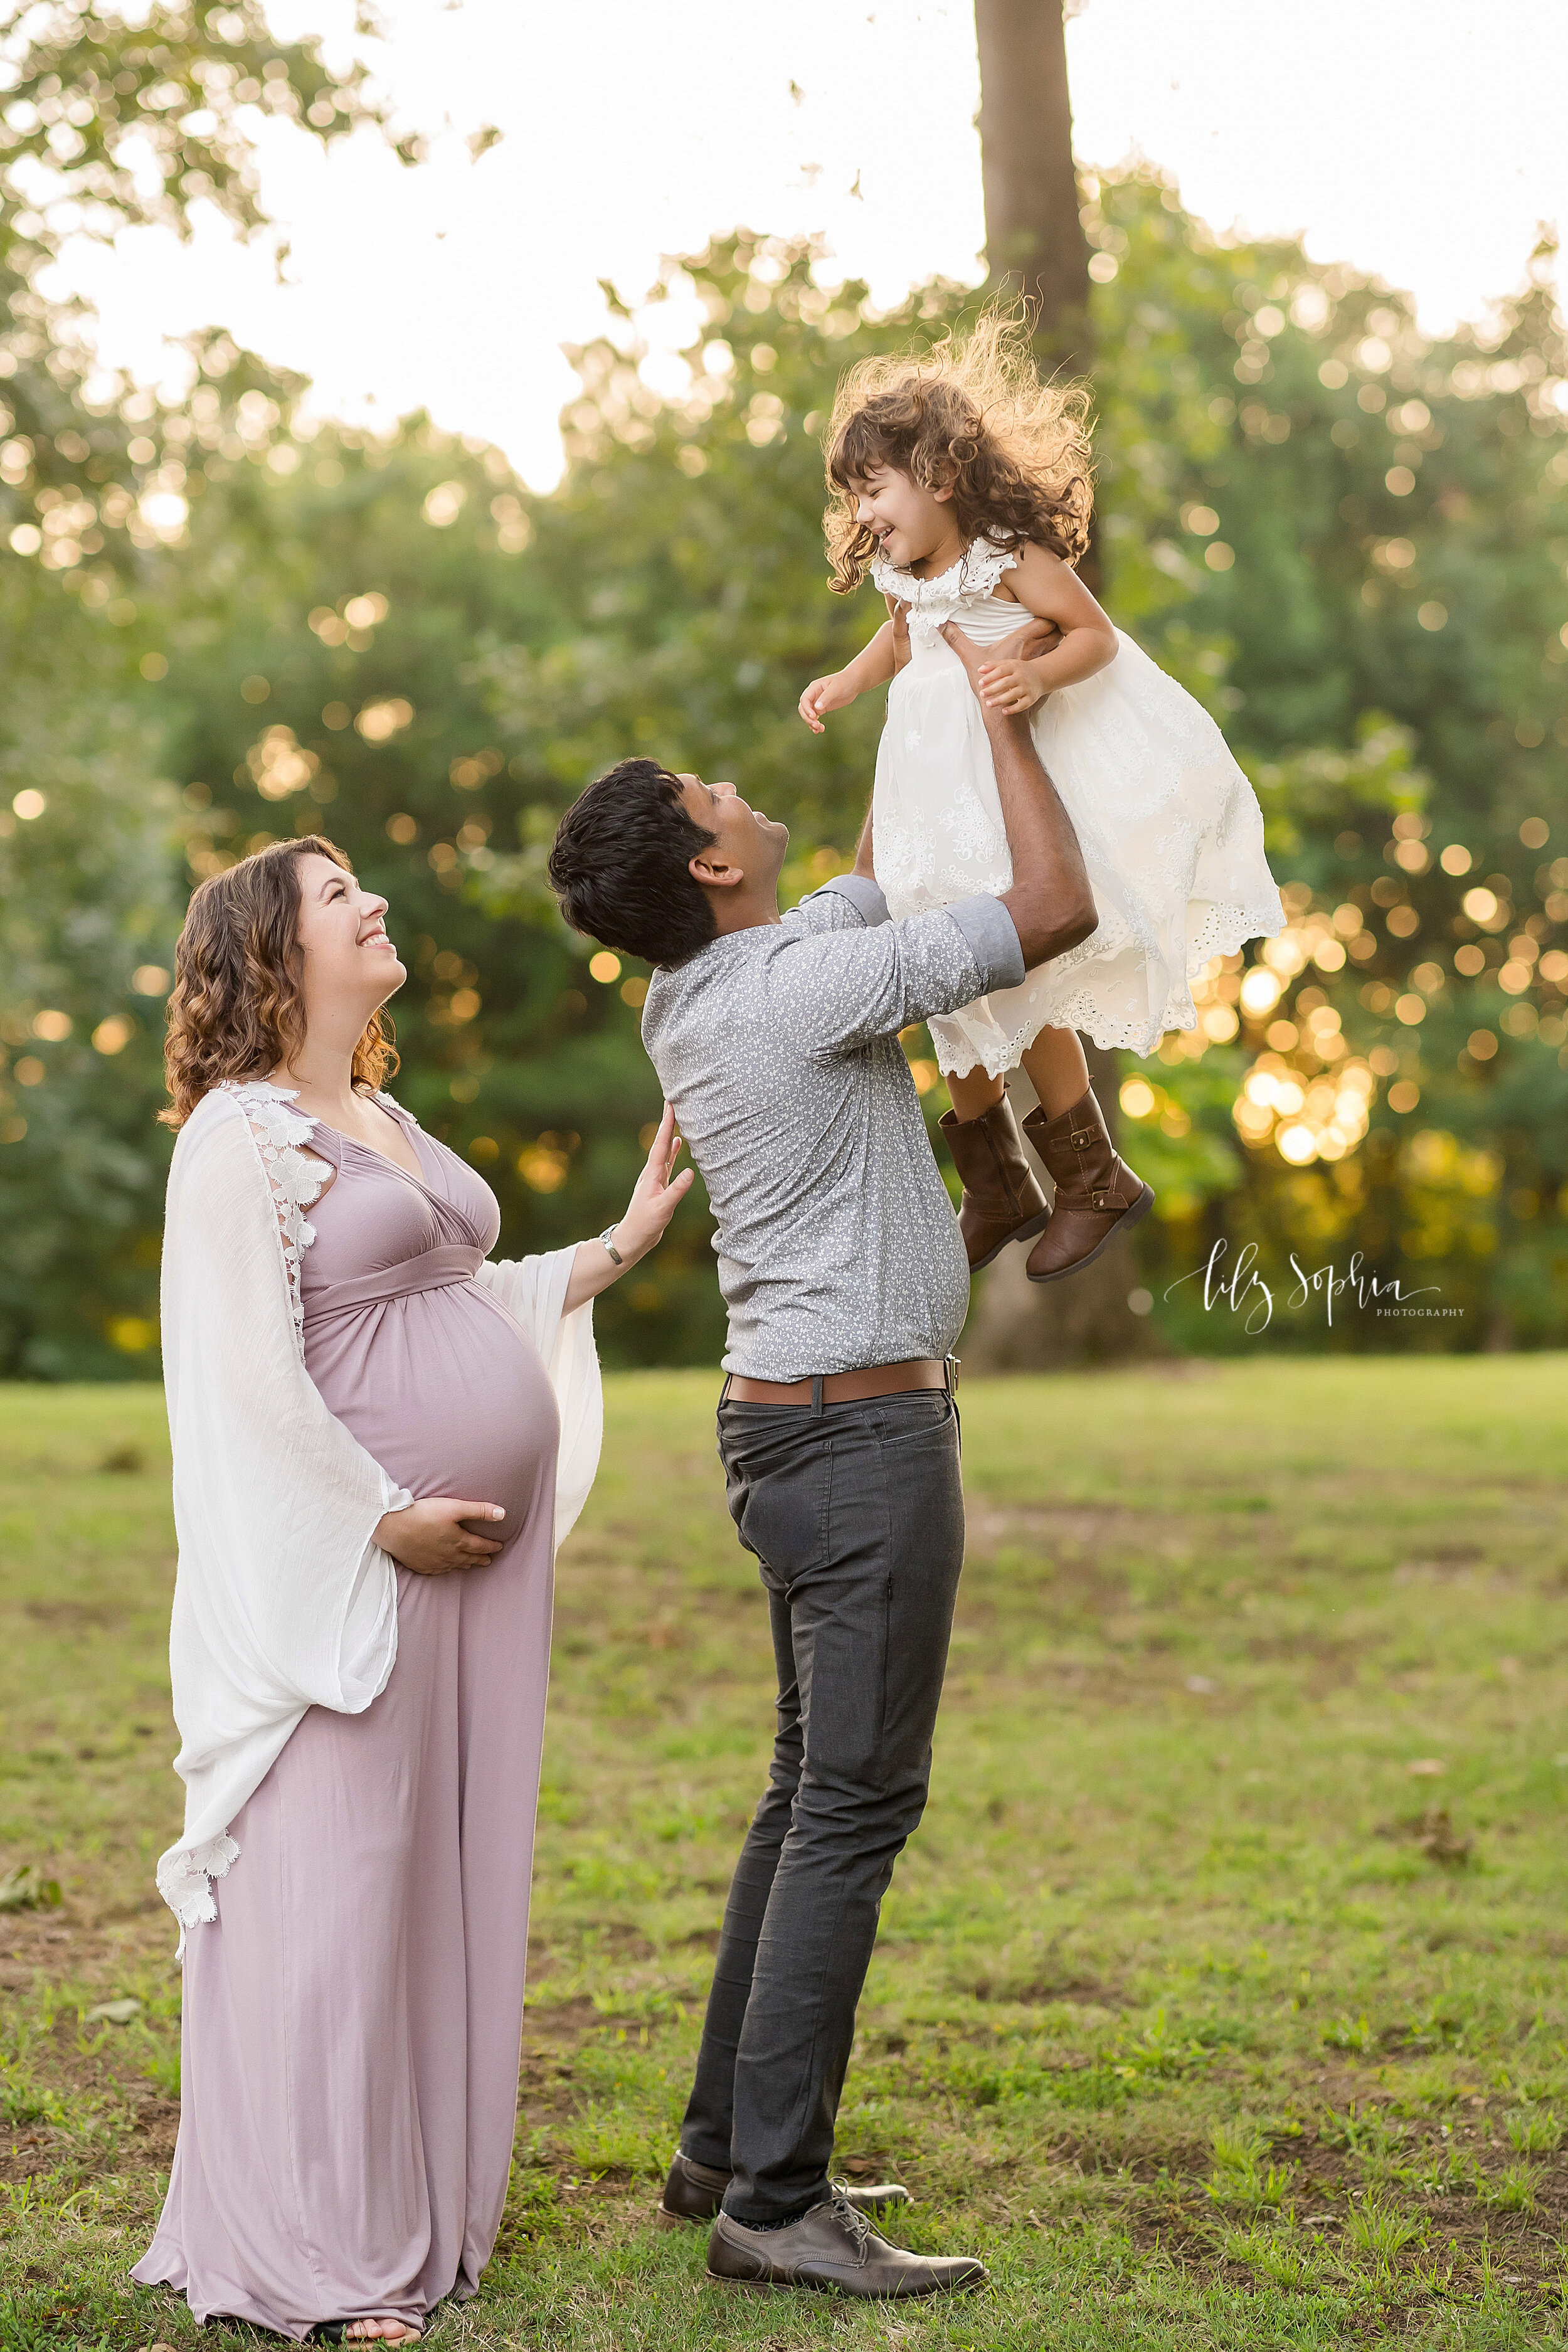  Maternity picture of a family as mom stands behind dad and dad tosses their young daughter into the air taken at sunset in a park near Atlanta, Georgia. 